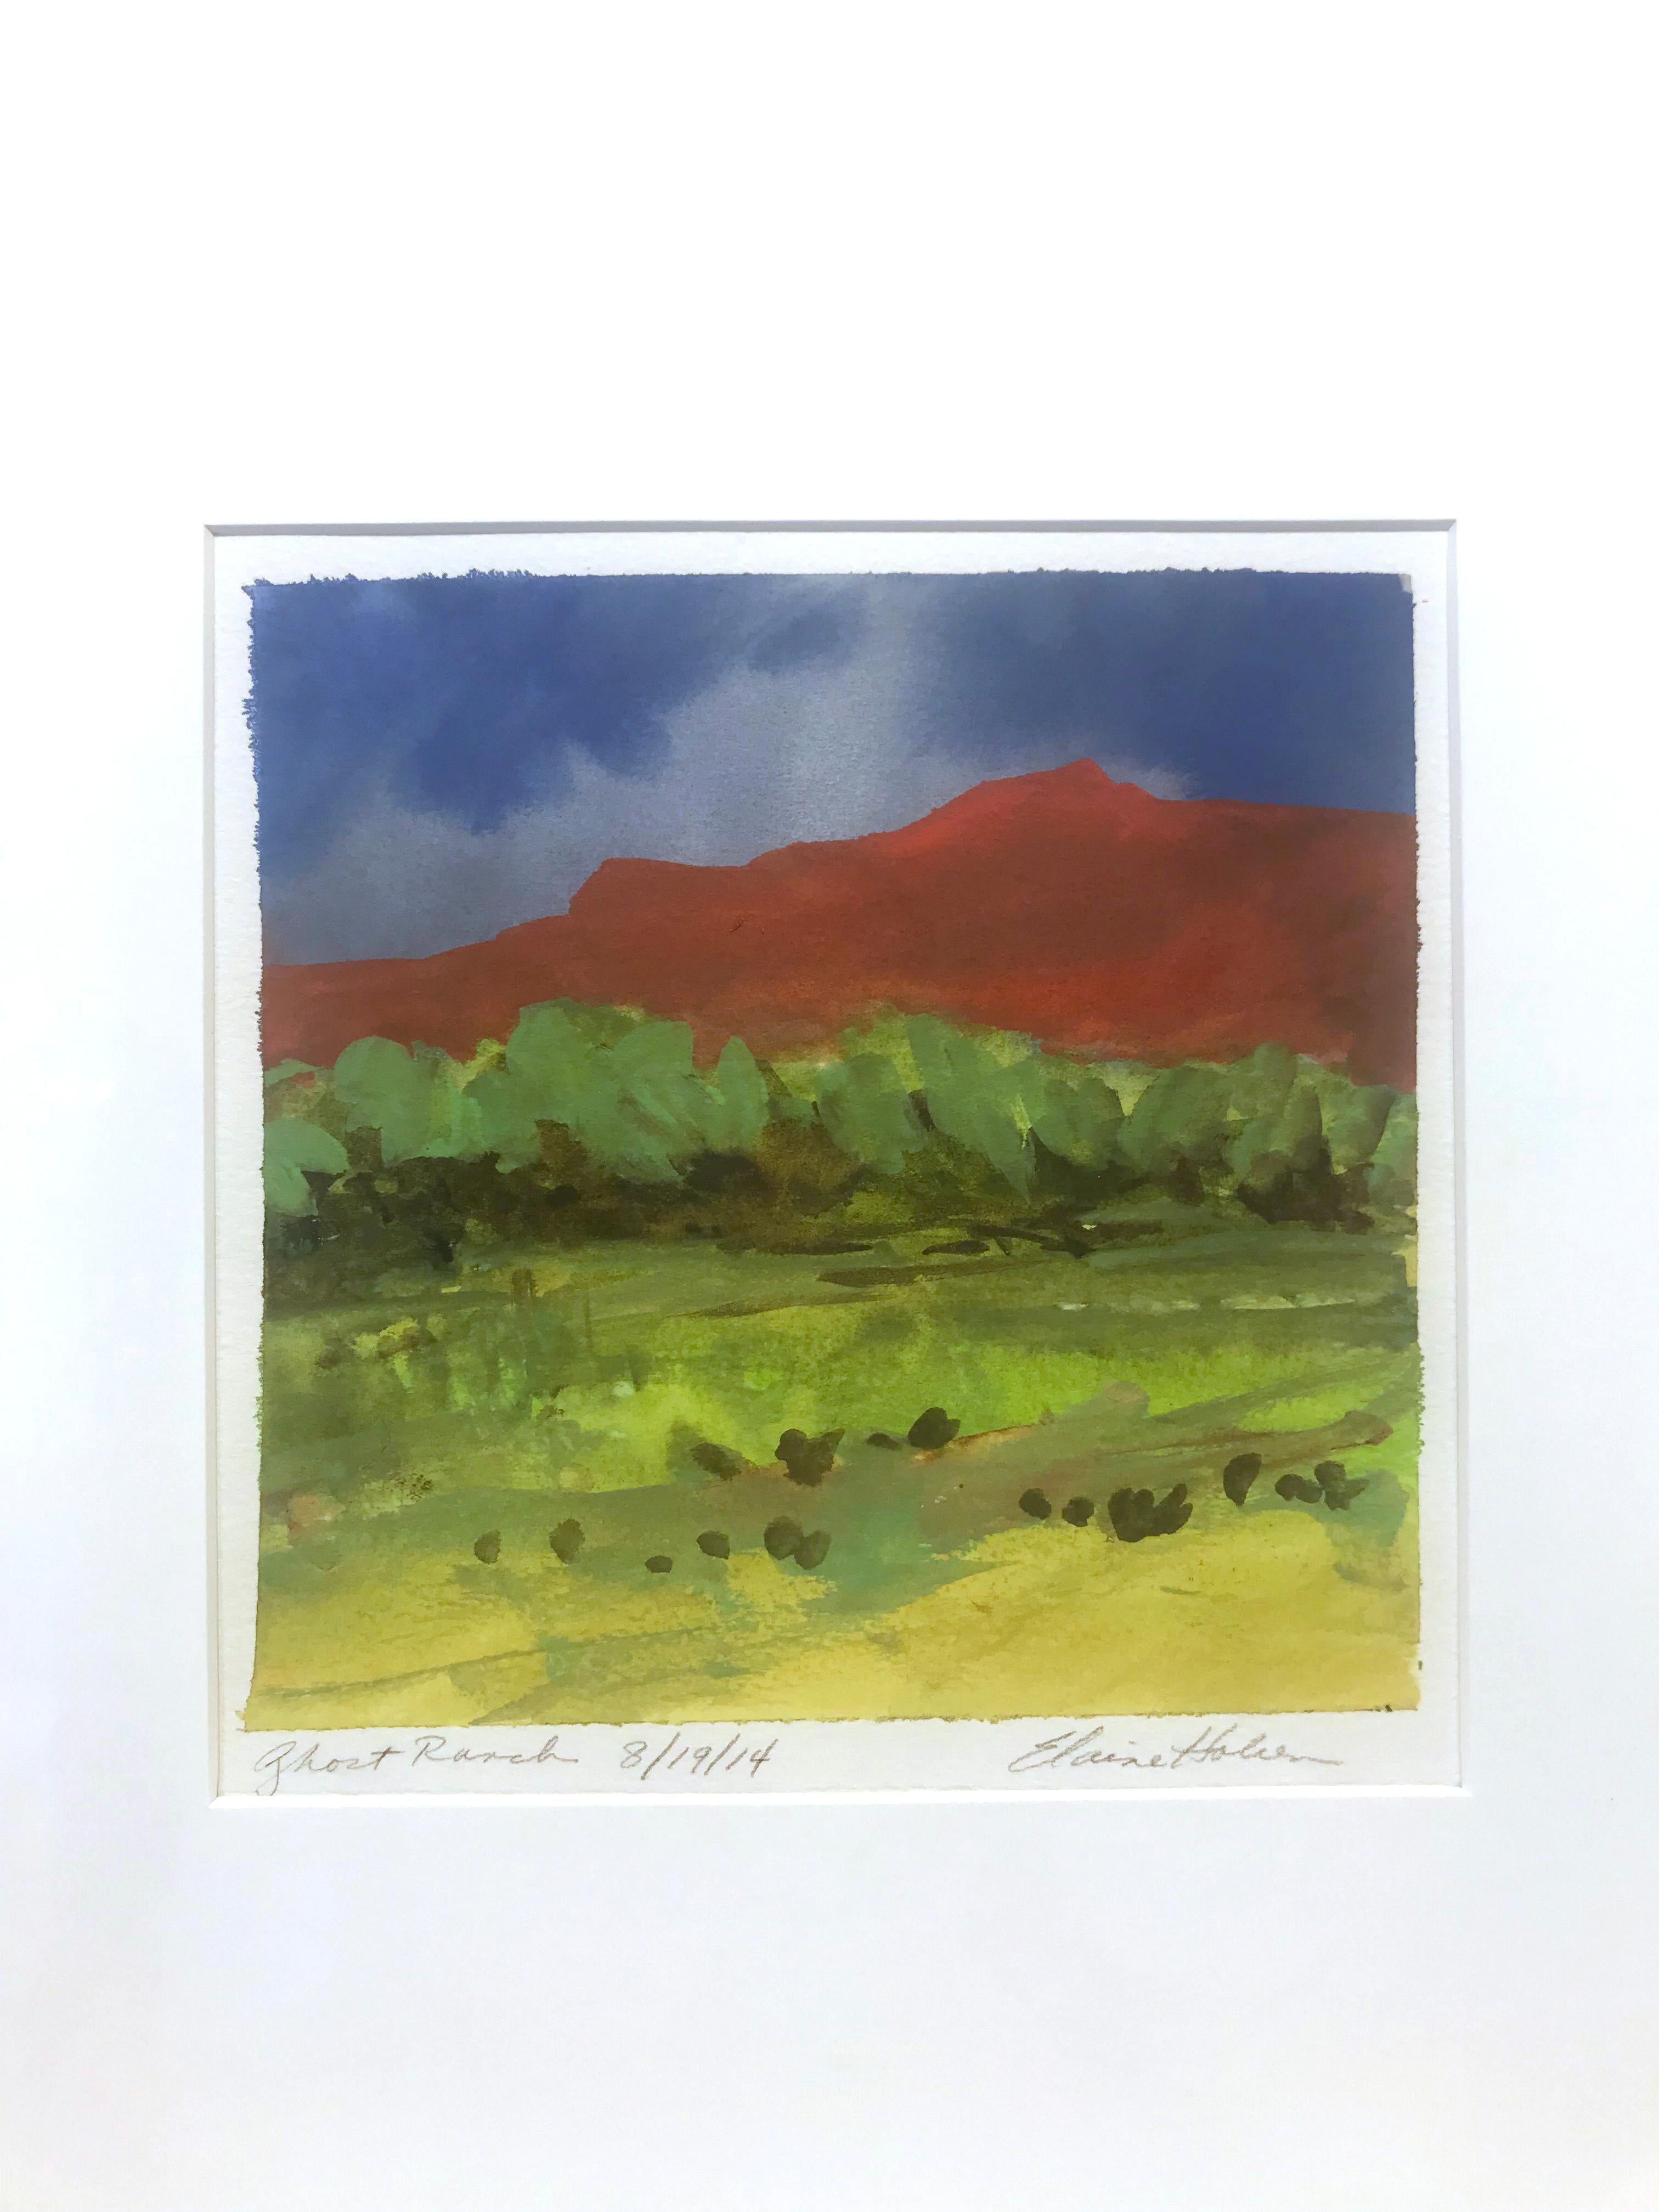 Ghost Ranch 8/19/14 - Painting by Elaine Holien